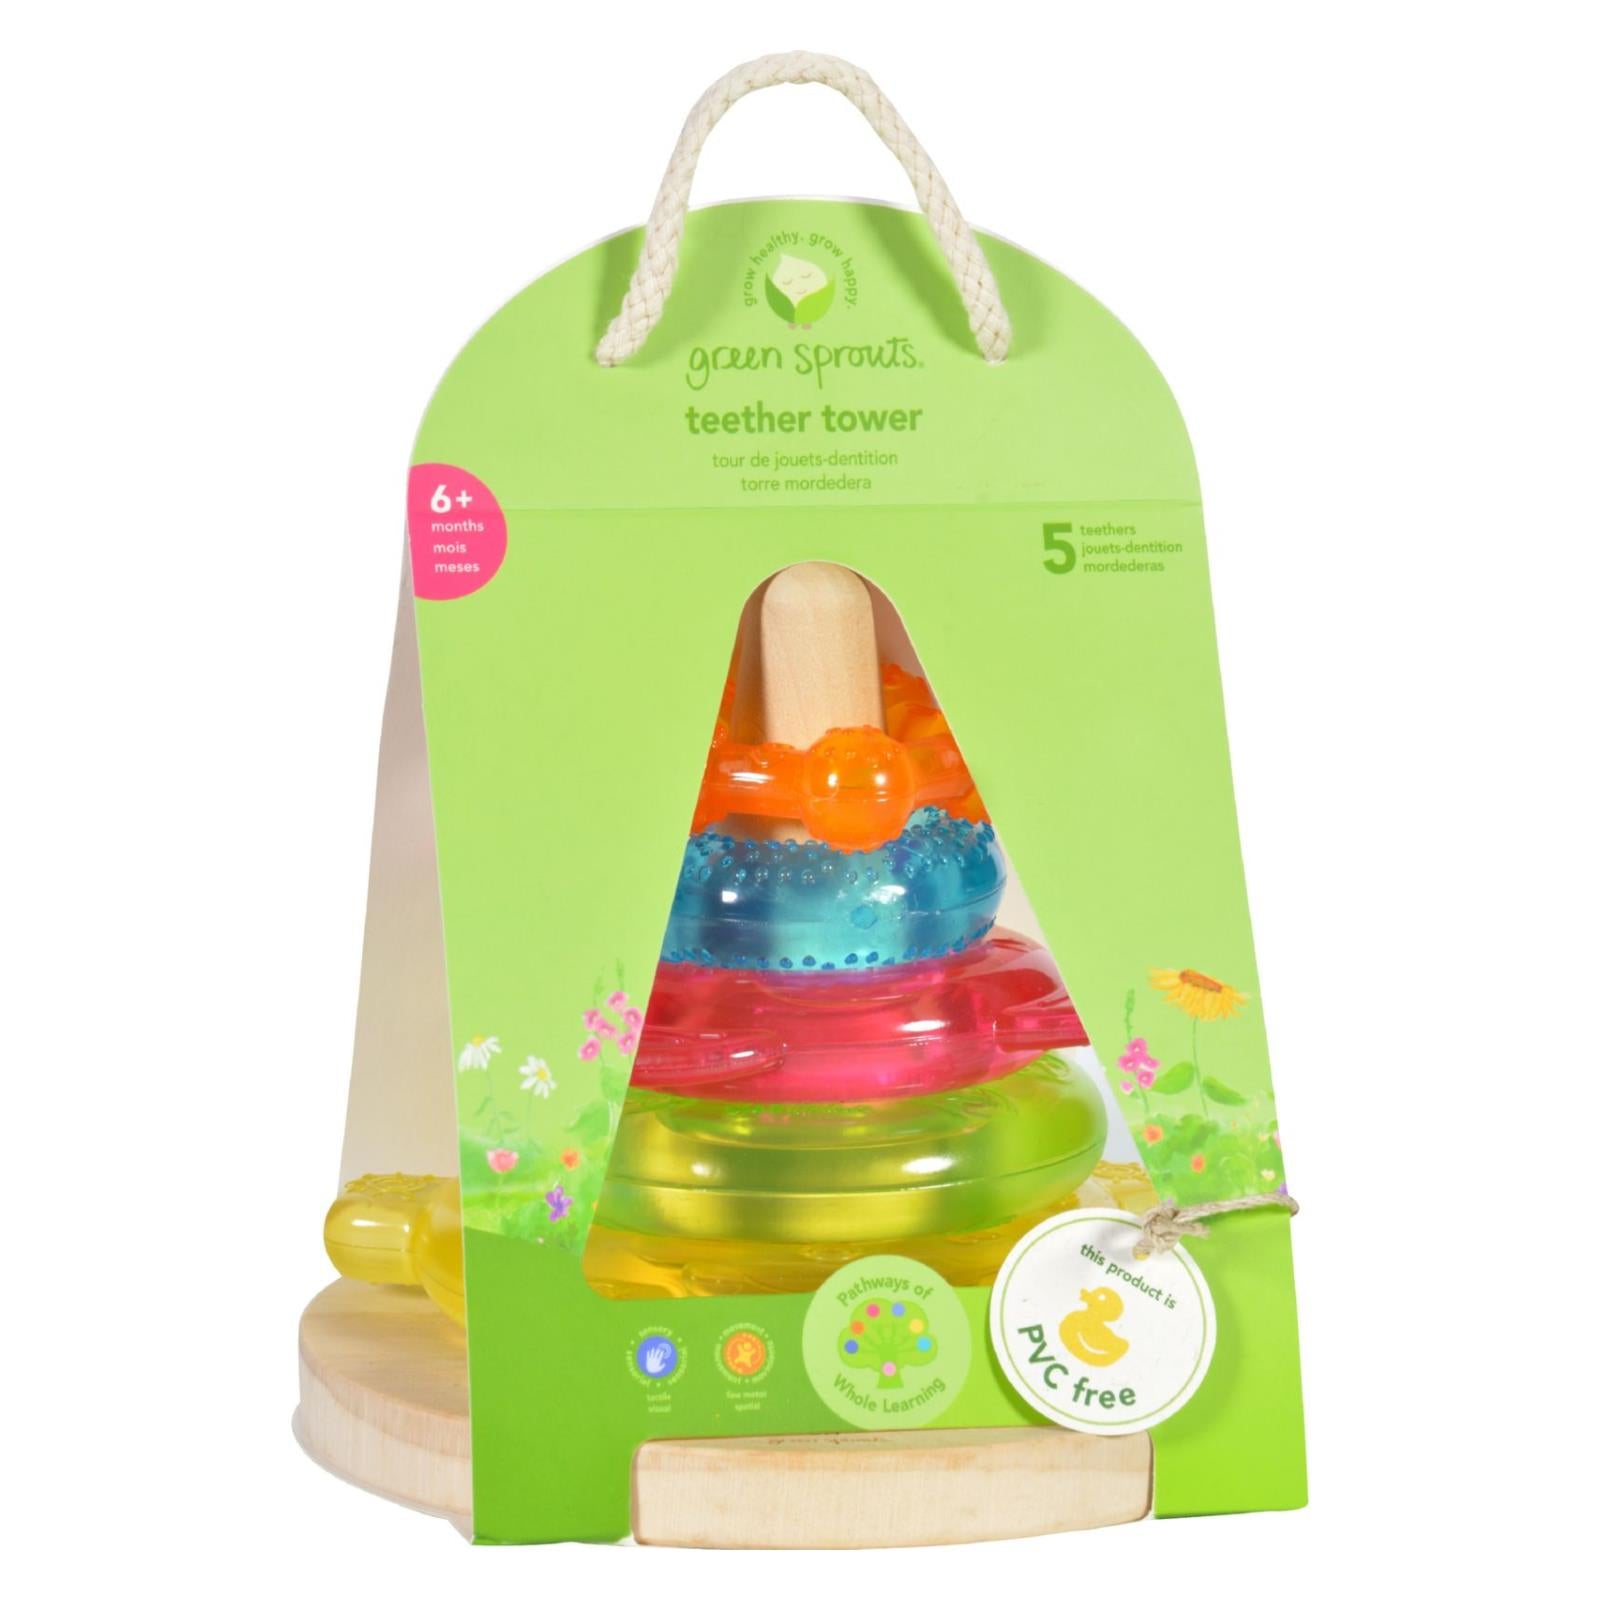 Green Sprouts Stacking Teether Tower - 6 Months Plus - Dream Window - 1 Count